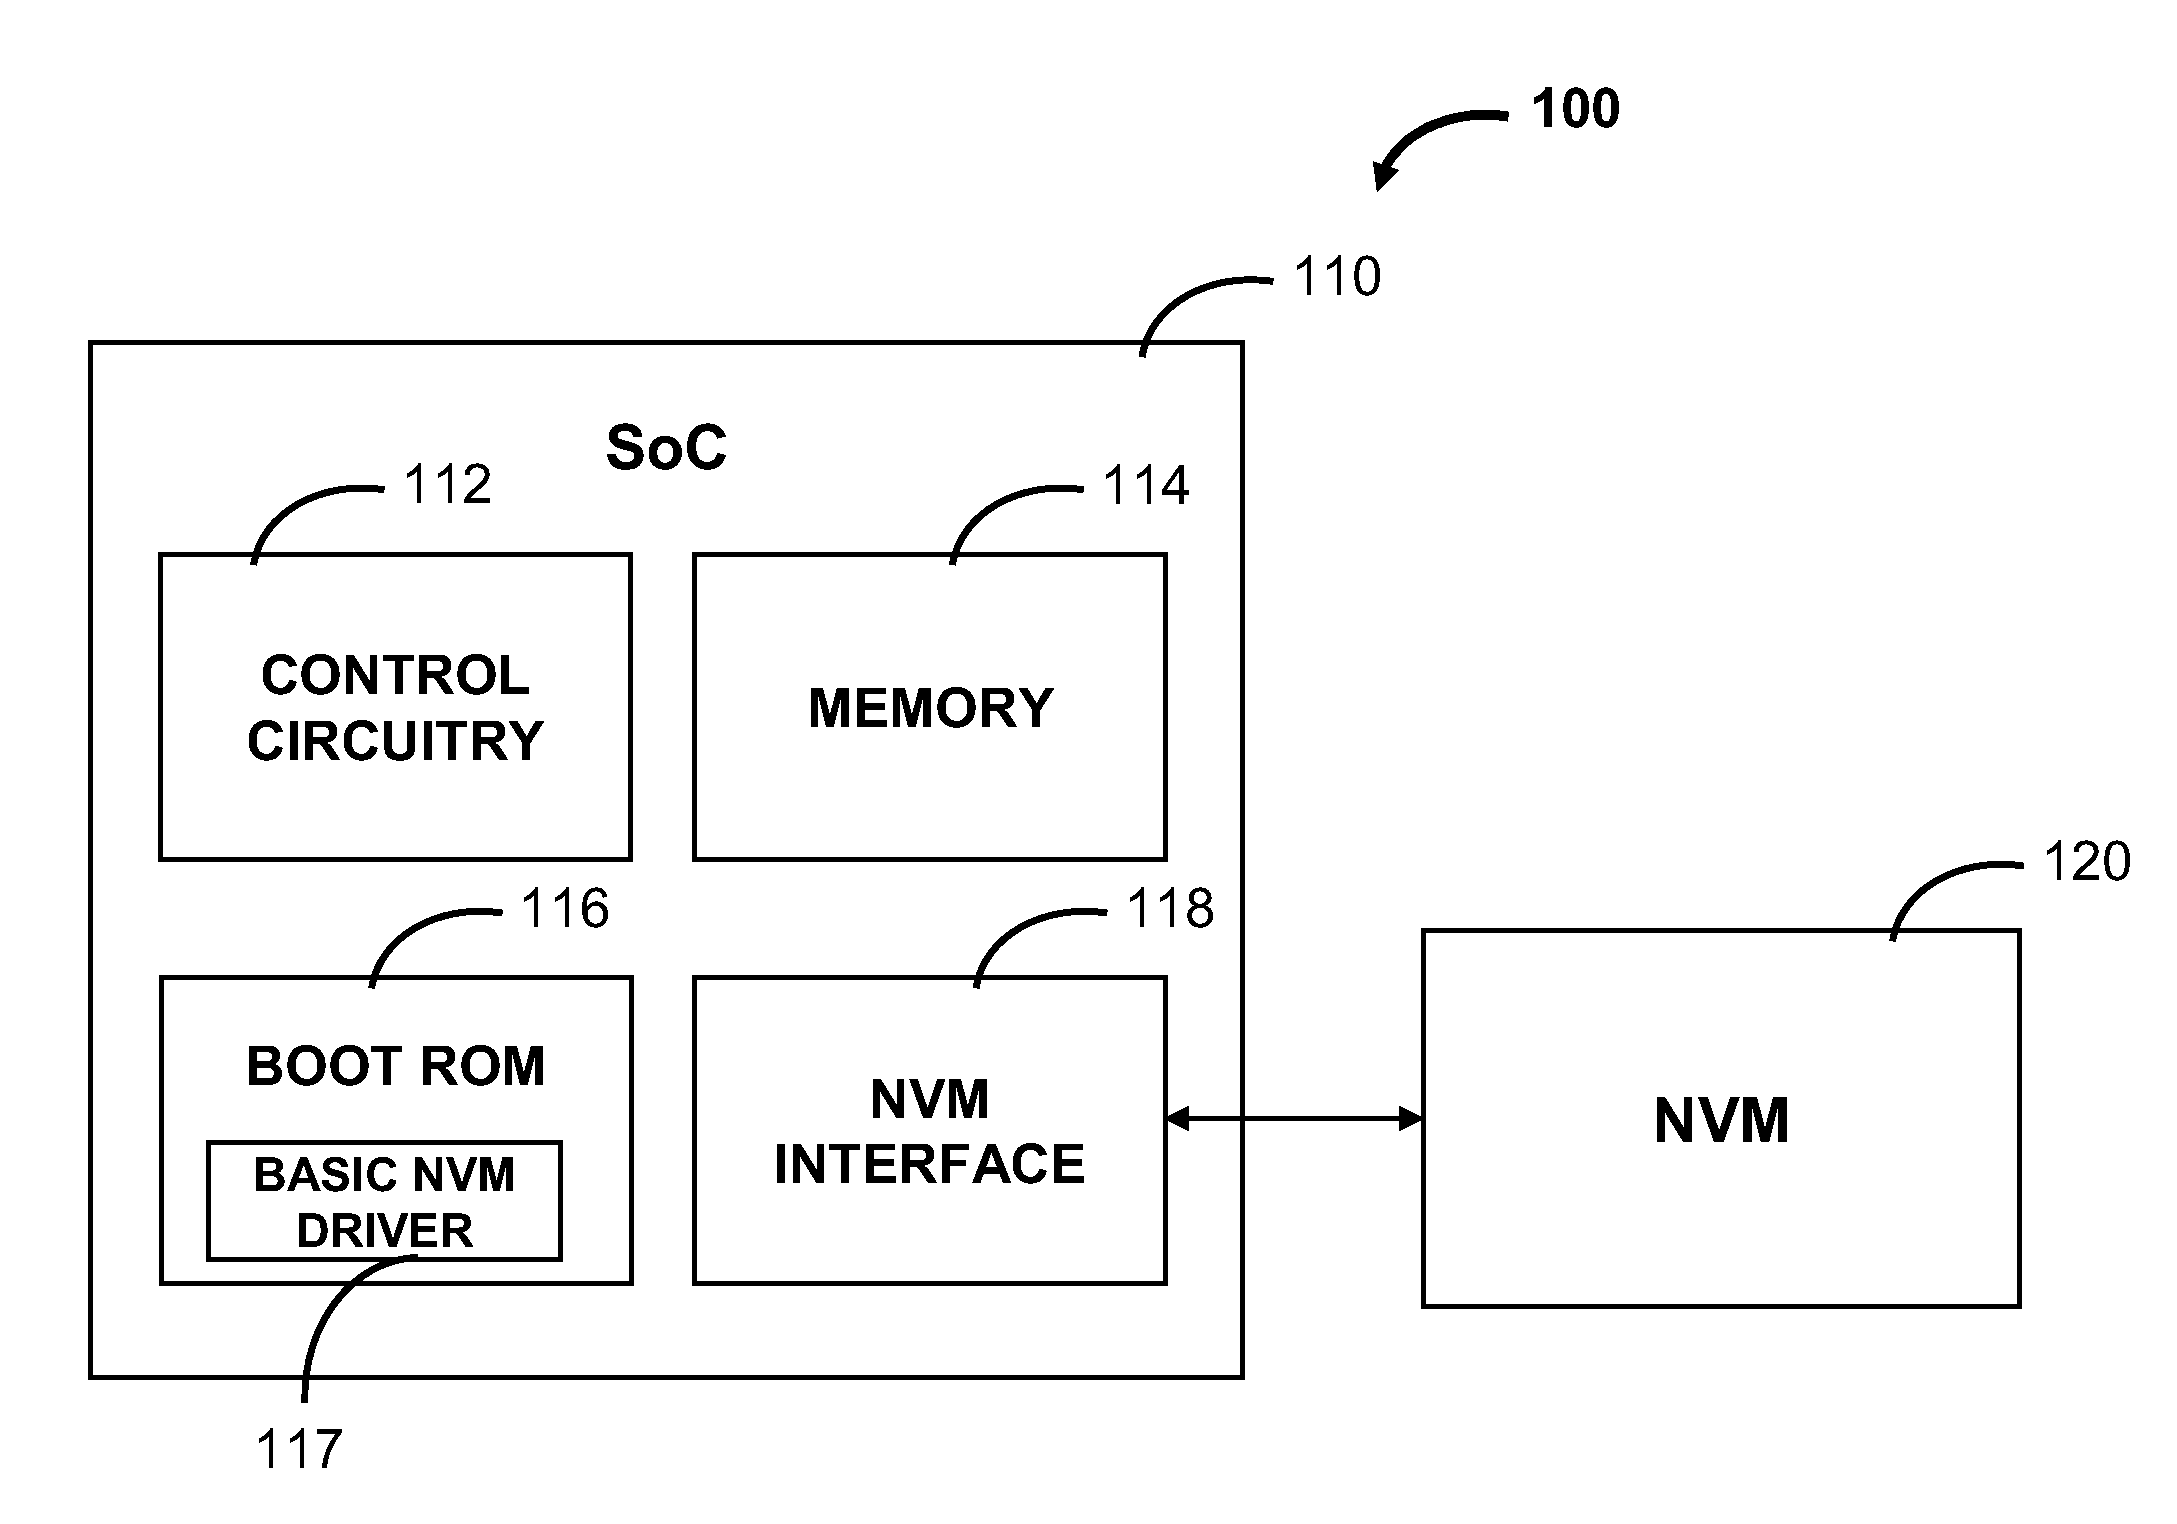 Boot data storage schemes for electronic devices